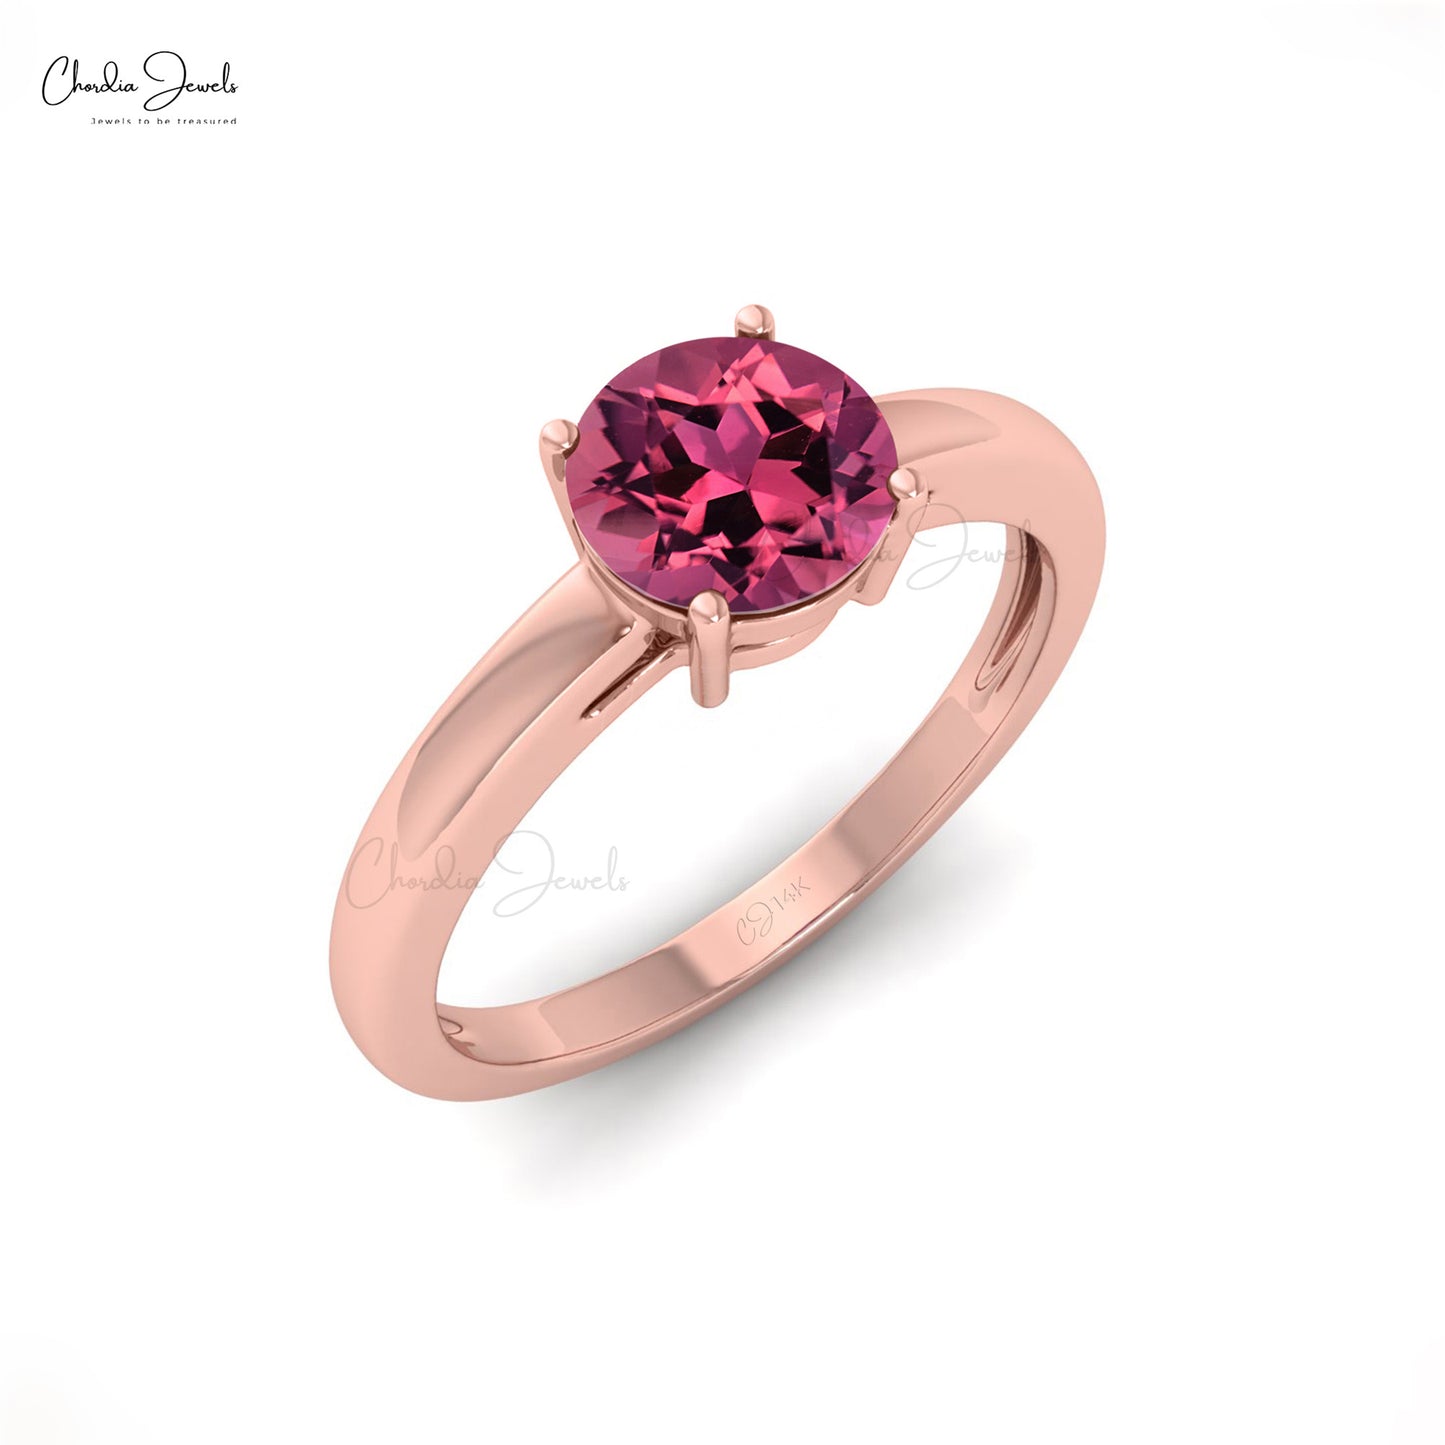 6mm Round Cut Natural Pink Tourmaline Solitaire Ring For Women, 14k Solid Gold Gemstone Ring For Anniversary Gift